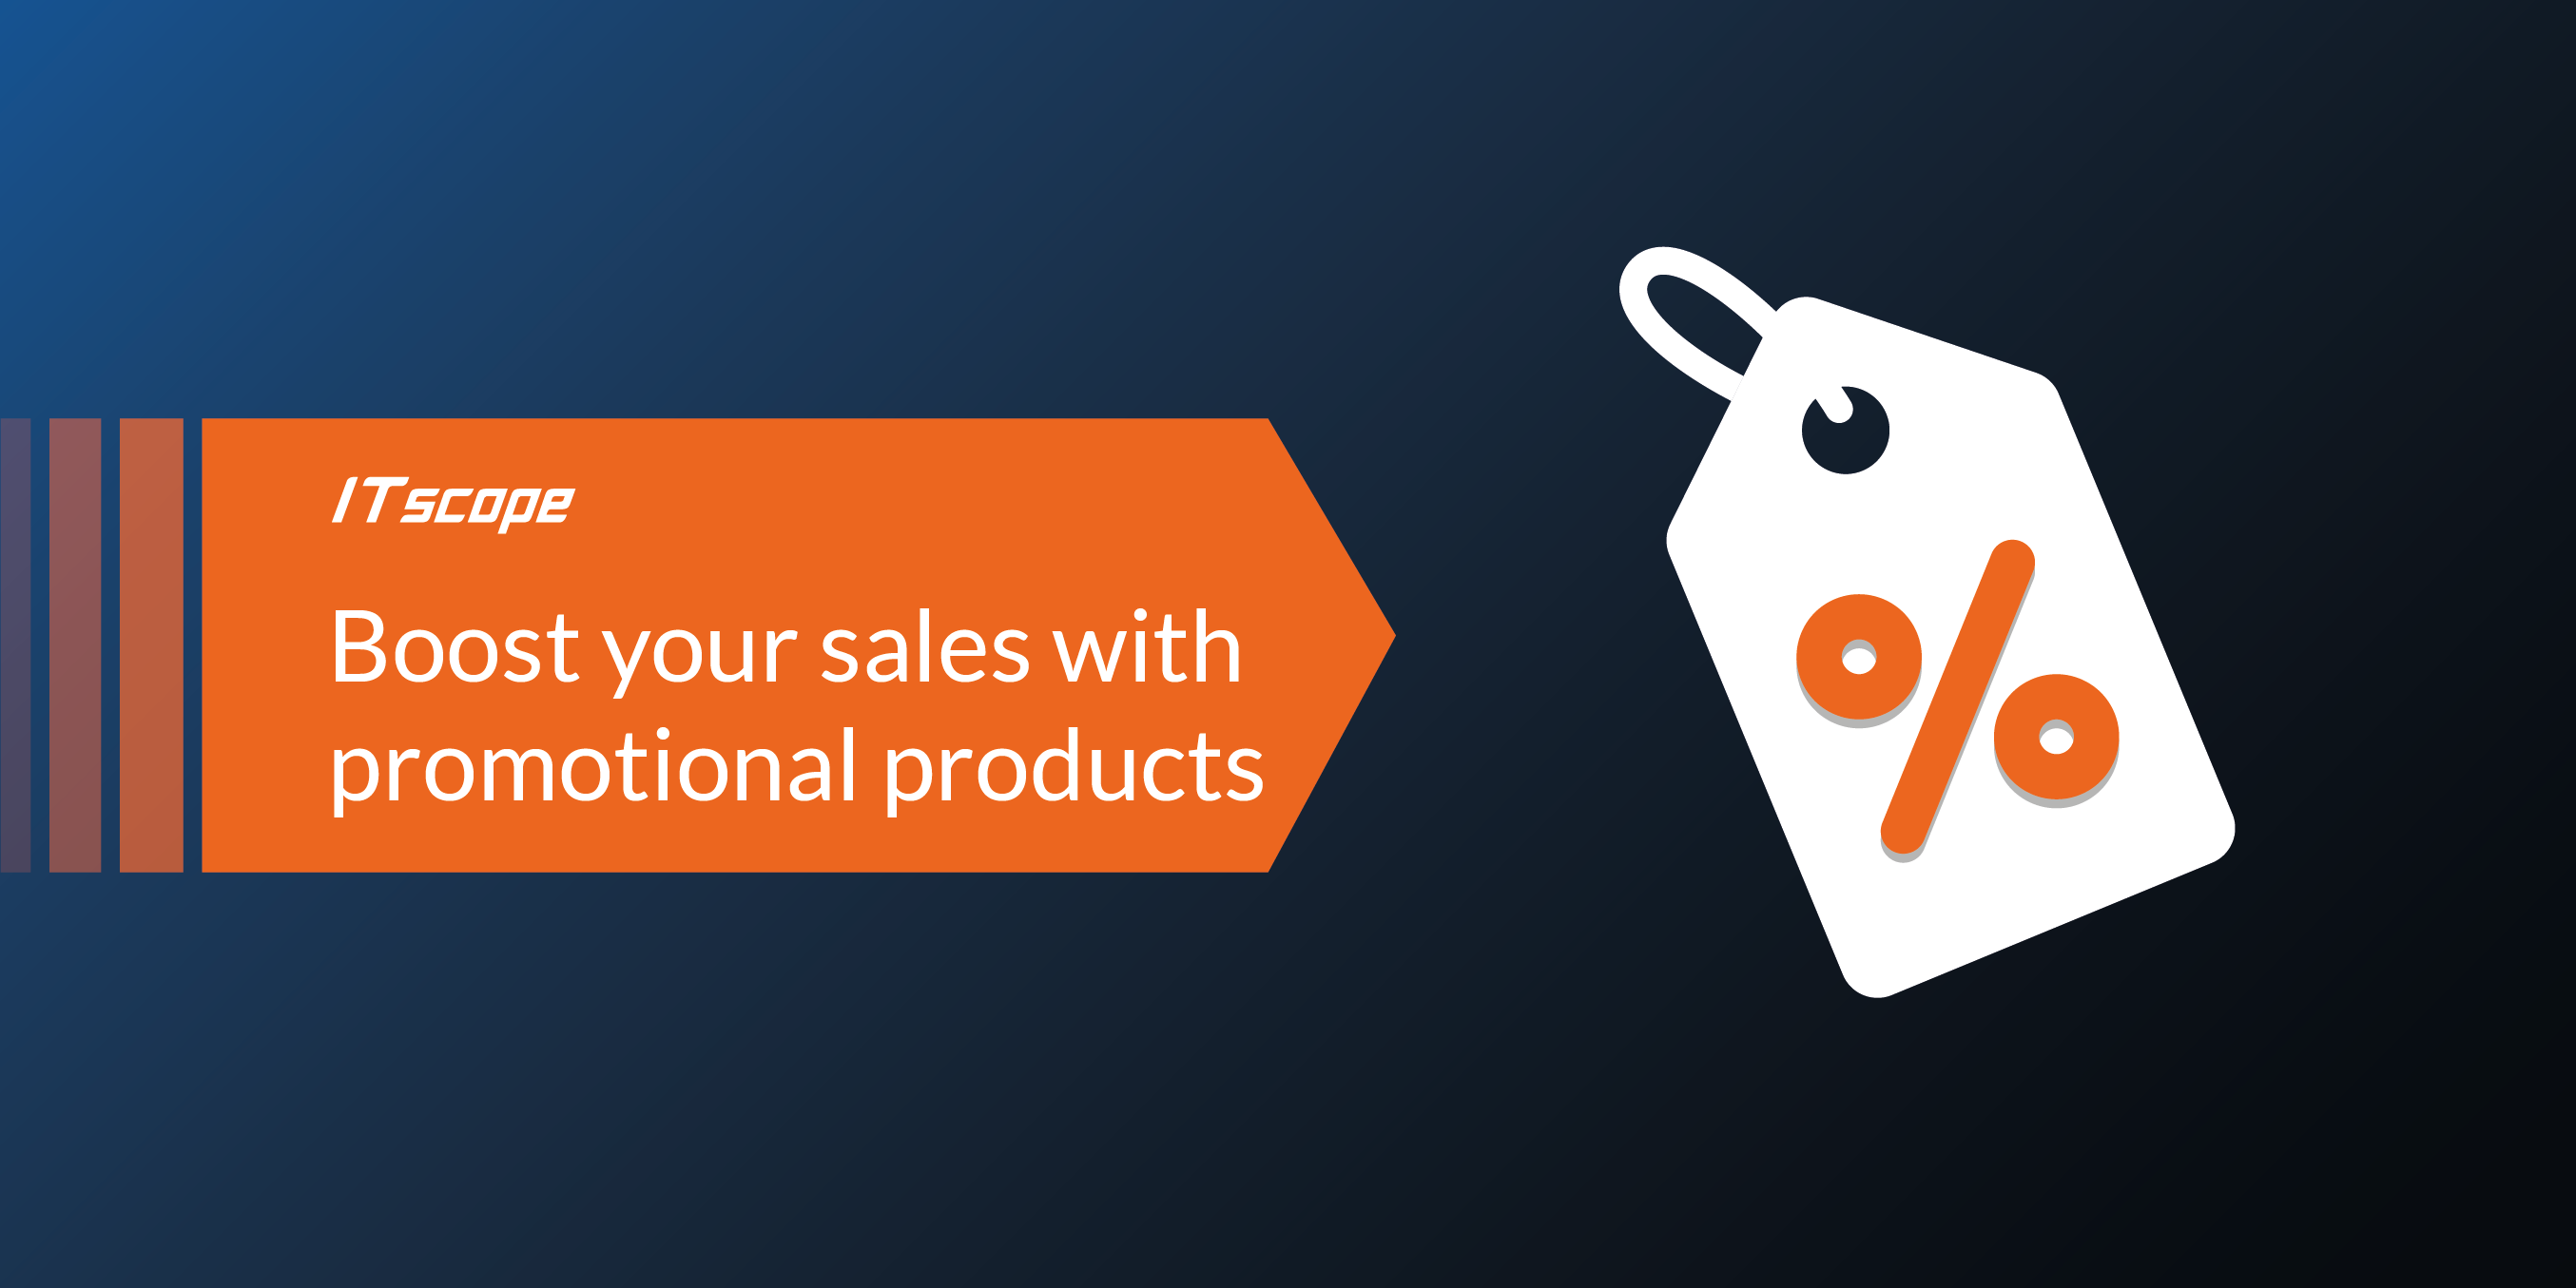 Boost your sales with promotional products in your B2B shop!